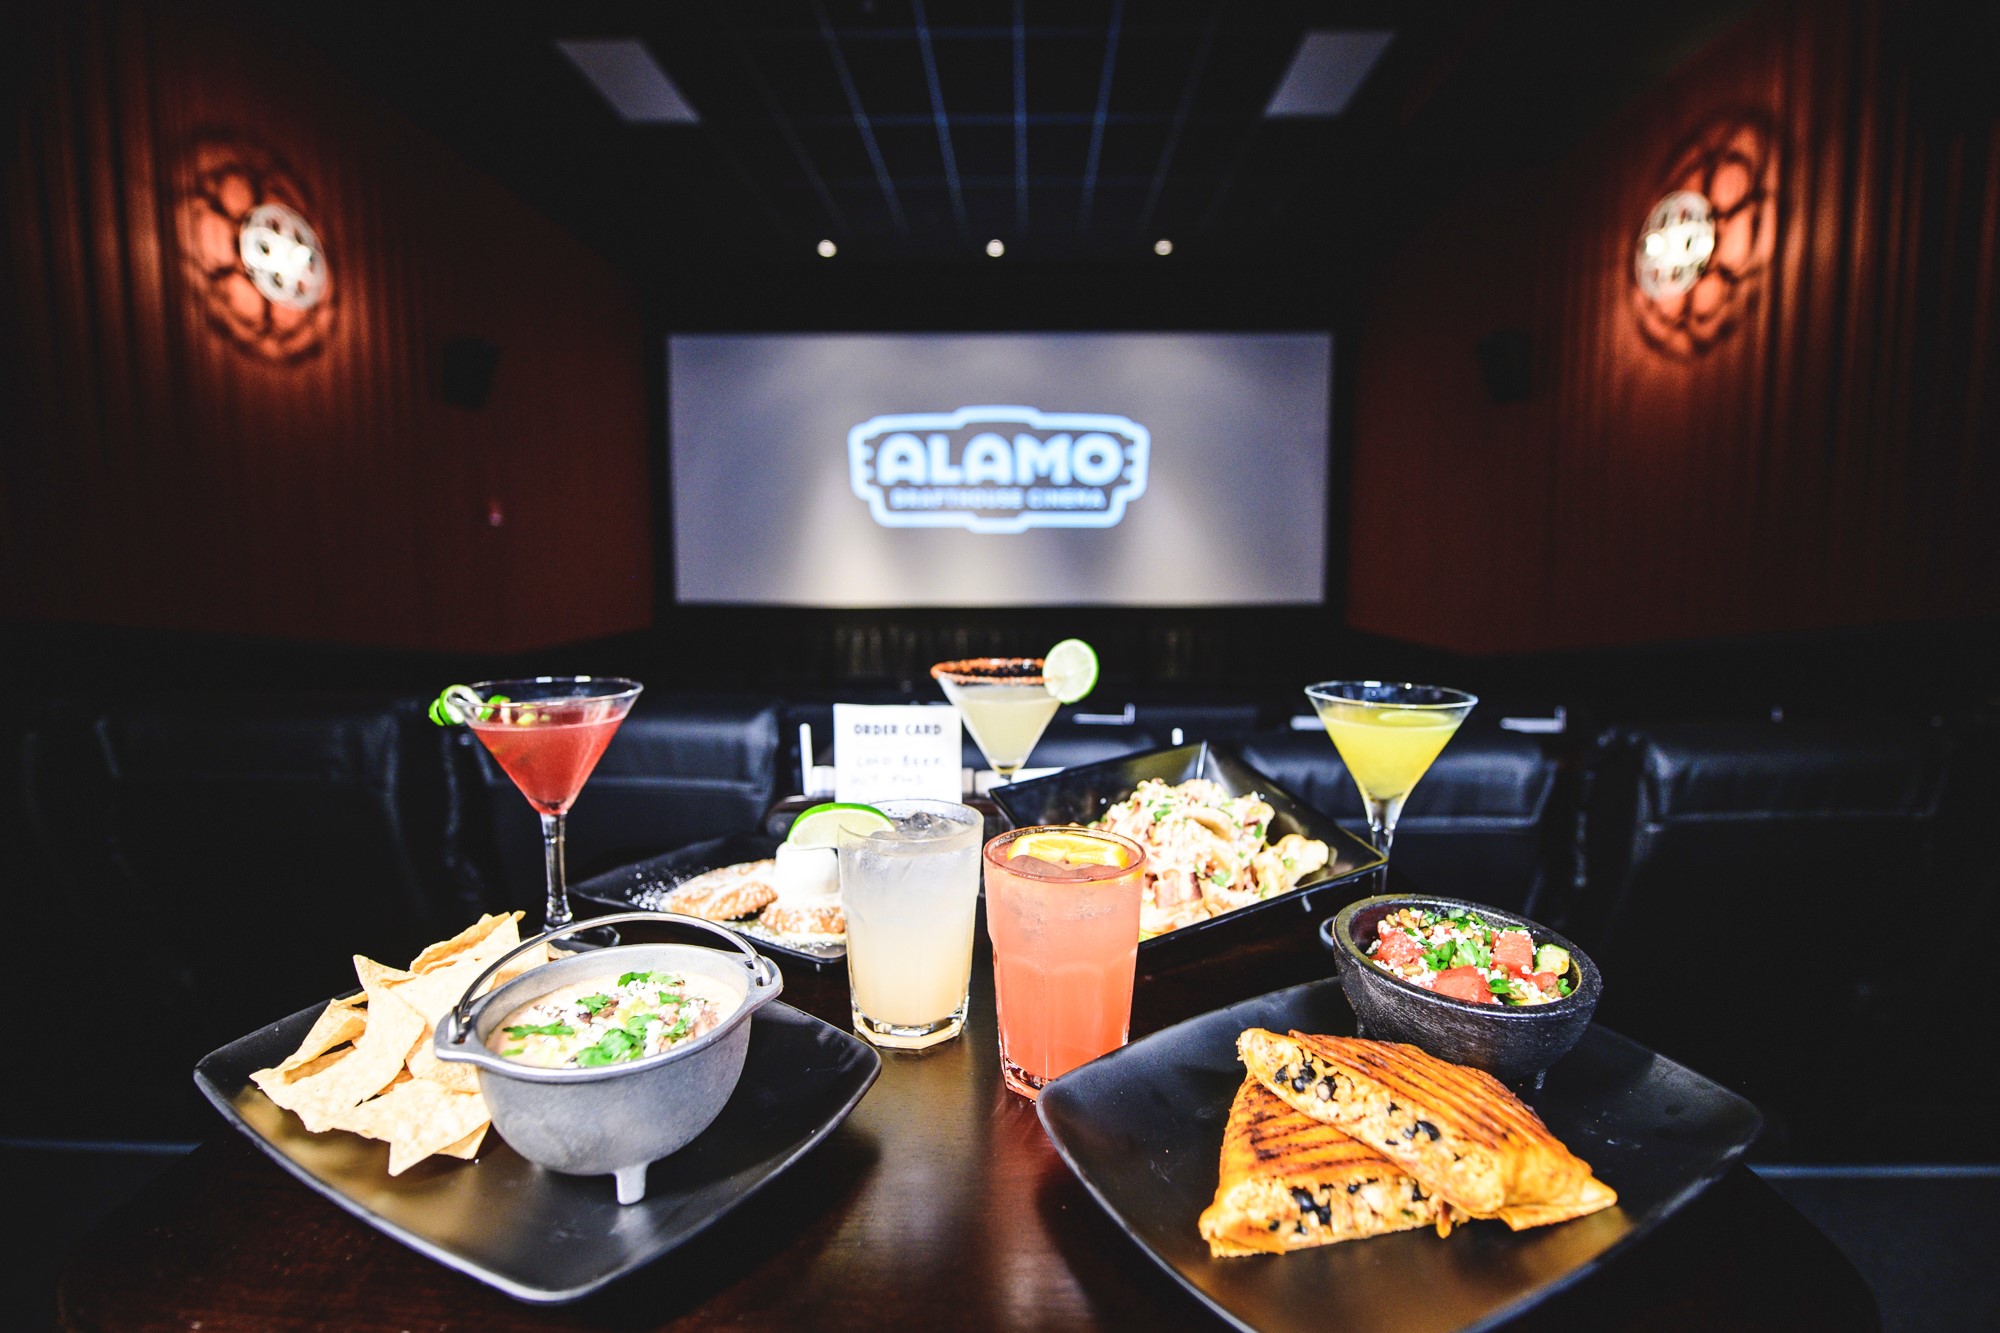 A spread of food and drinks laid out in a movie theater with a theater screen in the background.